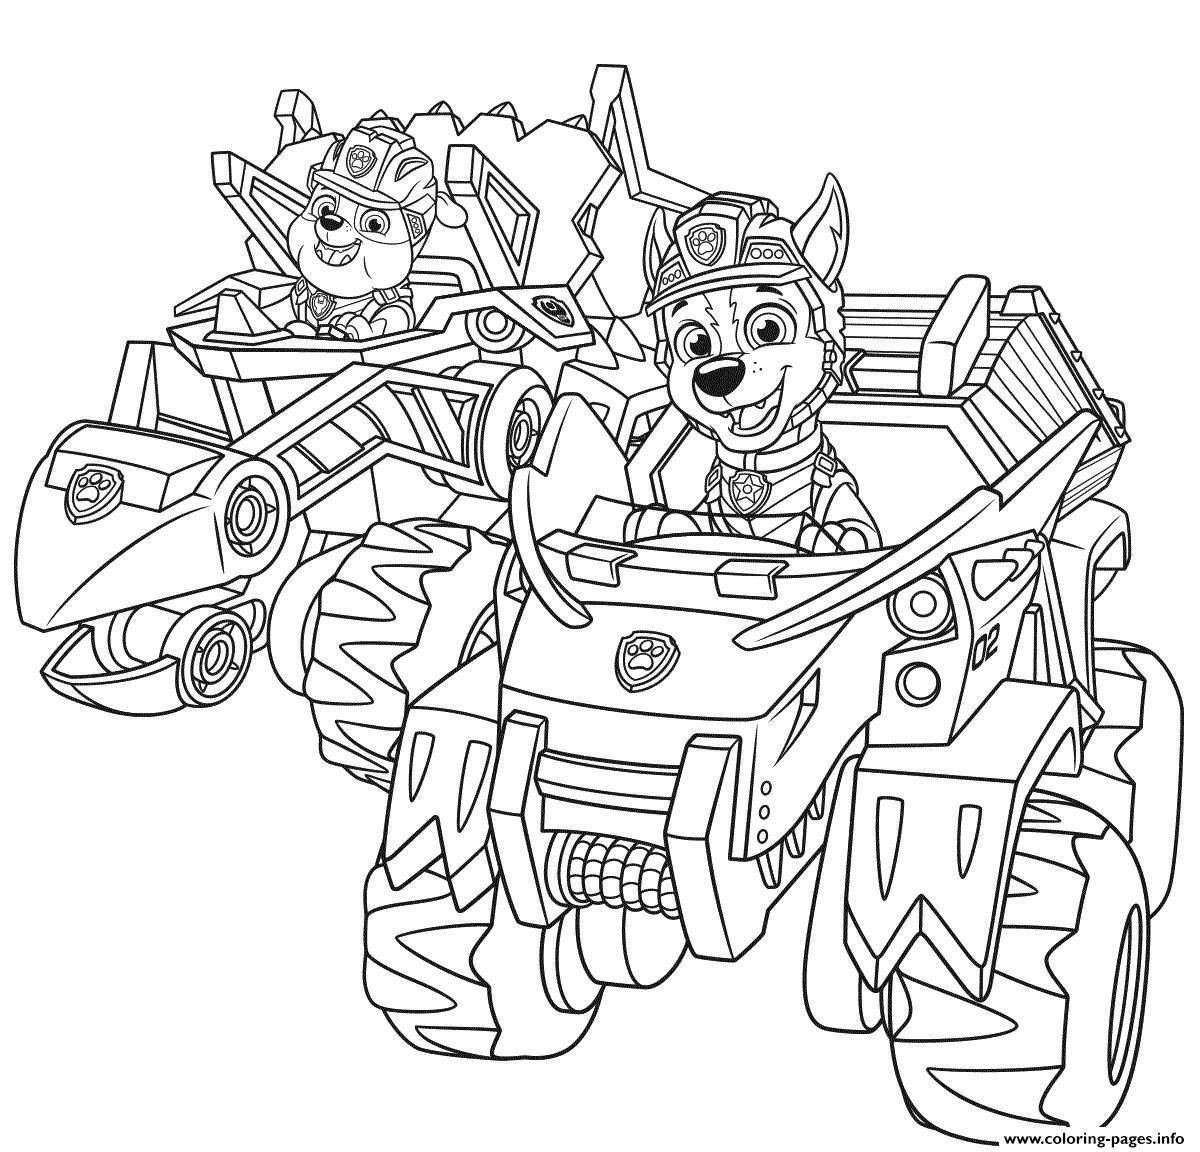 Adorable Paw Patrol Racer Coloring Page